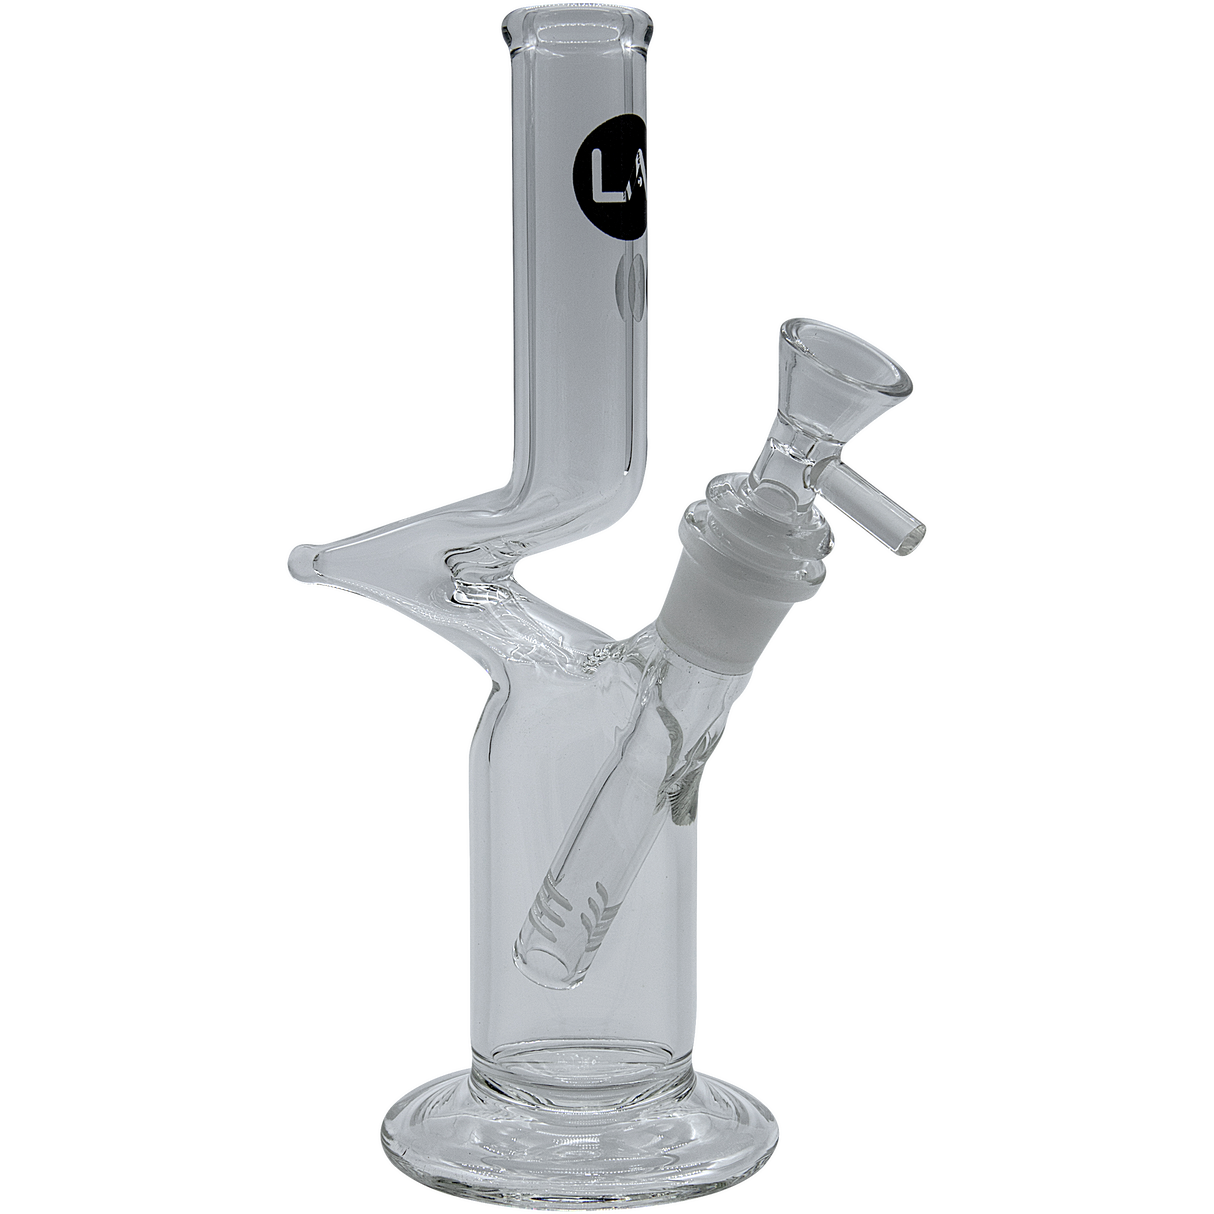 LA Pipes "The Zig" Straight Zong Style Bong, Clear Borosilicate Glass, 8" Height, Side View